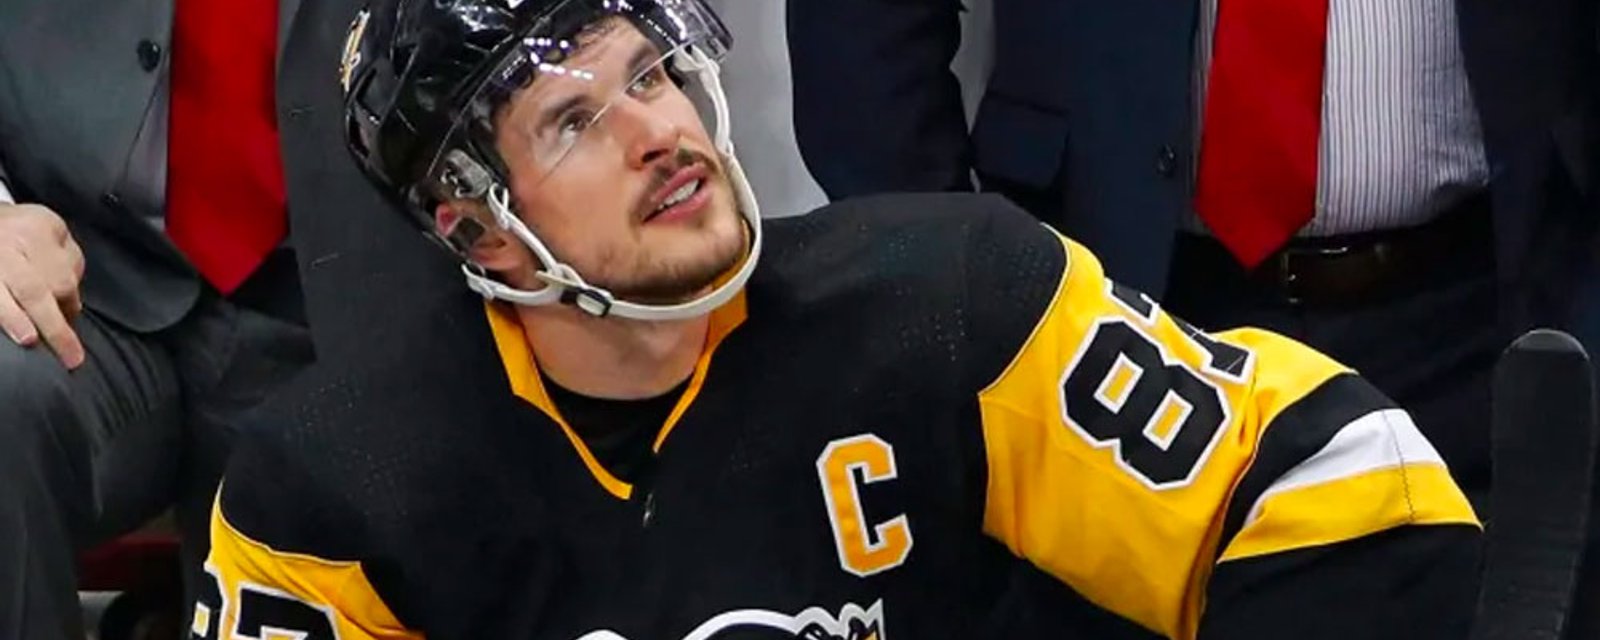 Sidney Crosby FINALLY releases a statement and speaks out against racism